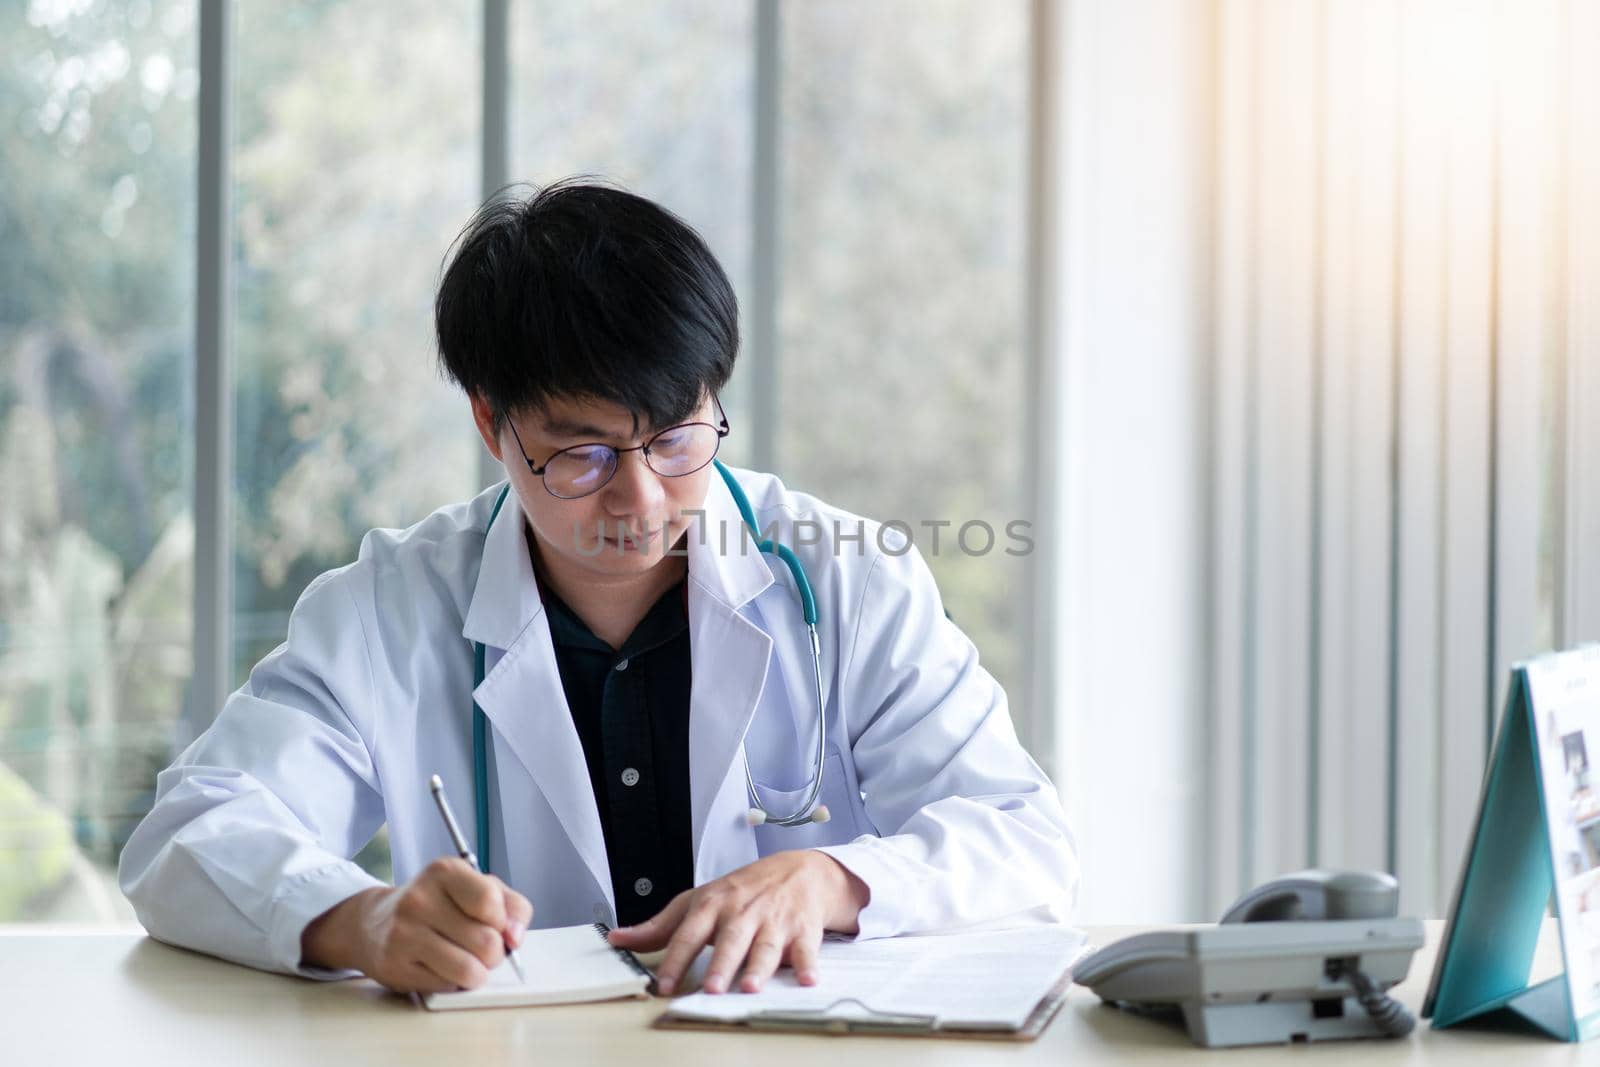 Male doctor sitting in office analyzing and writing patient sickness report by Buttus_casso